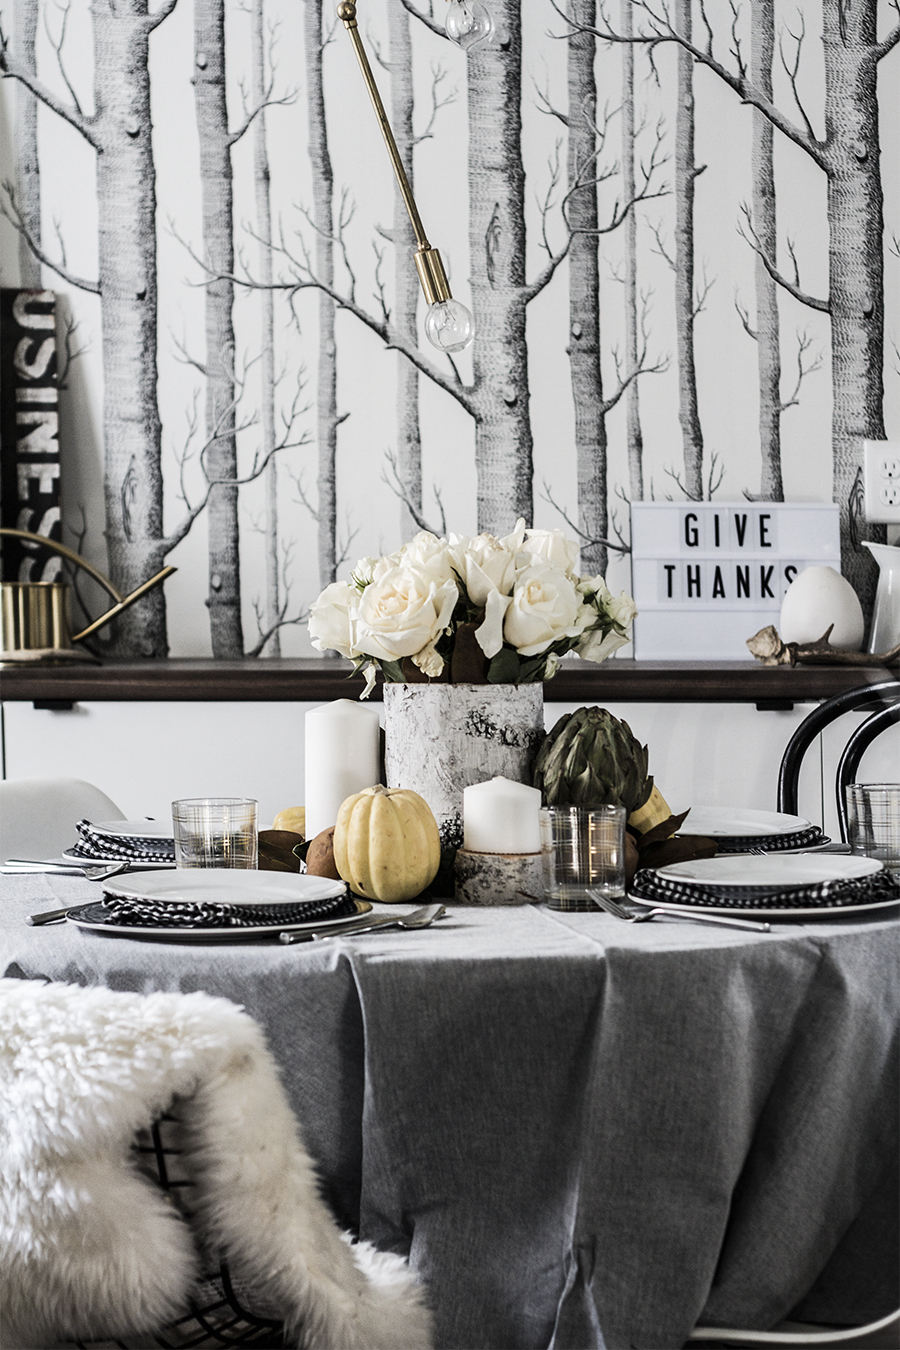 A Simple & Inexpensive Thanksgiving Table